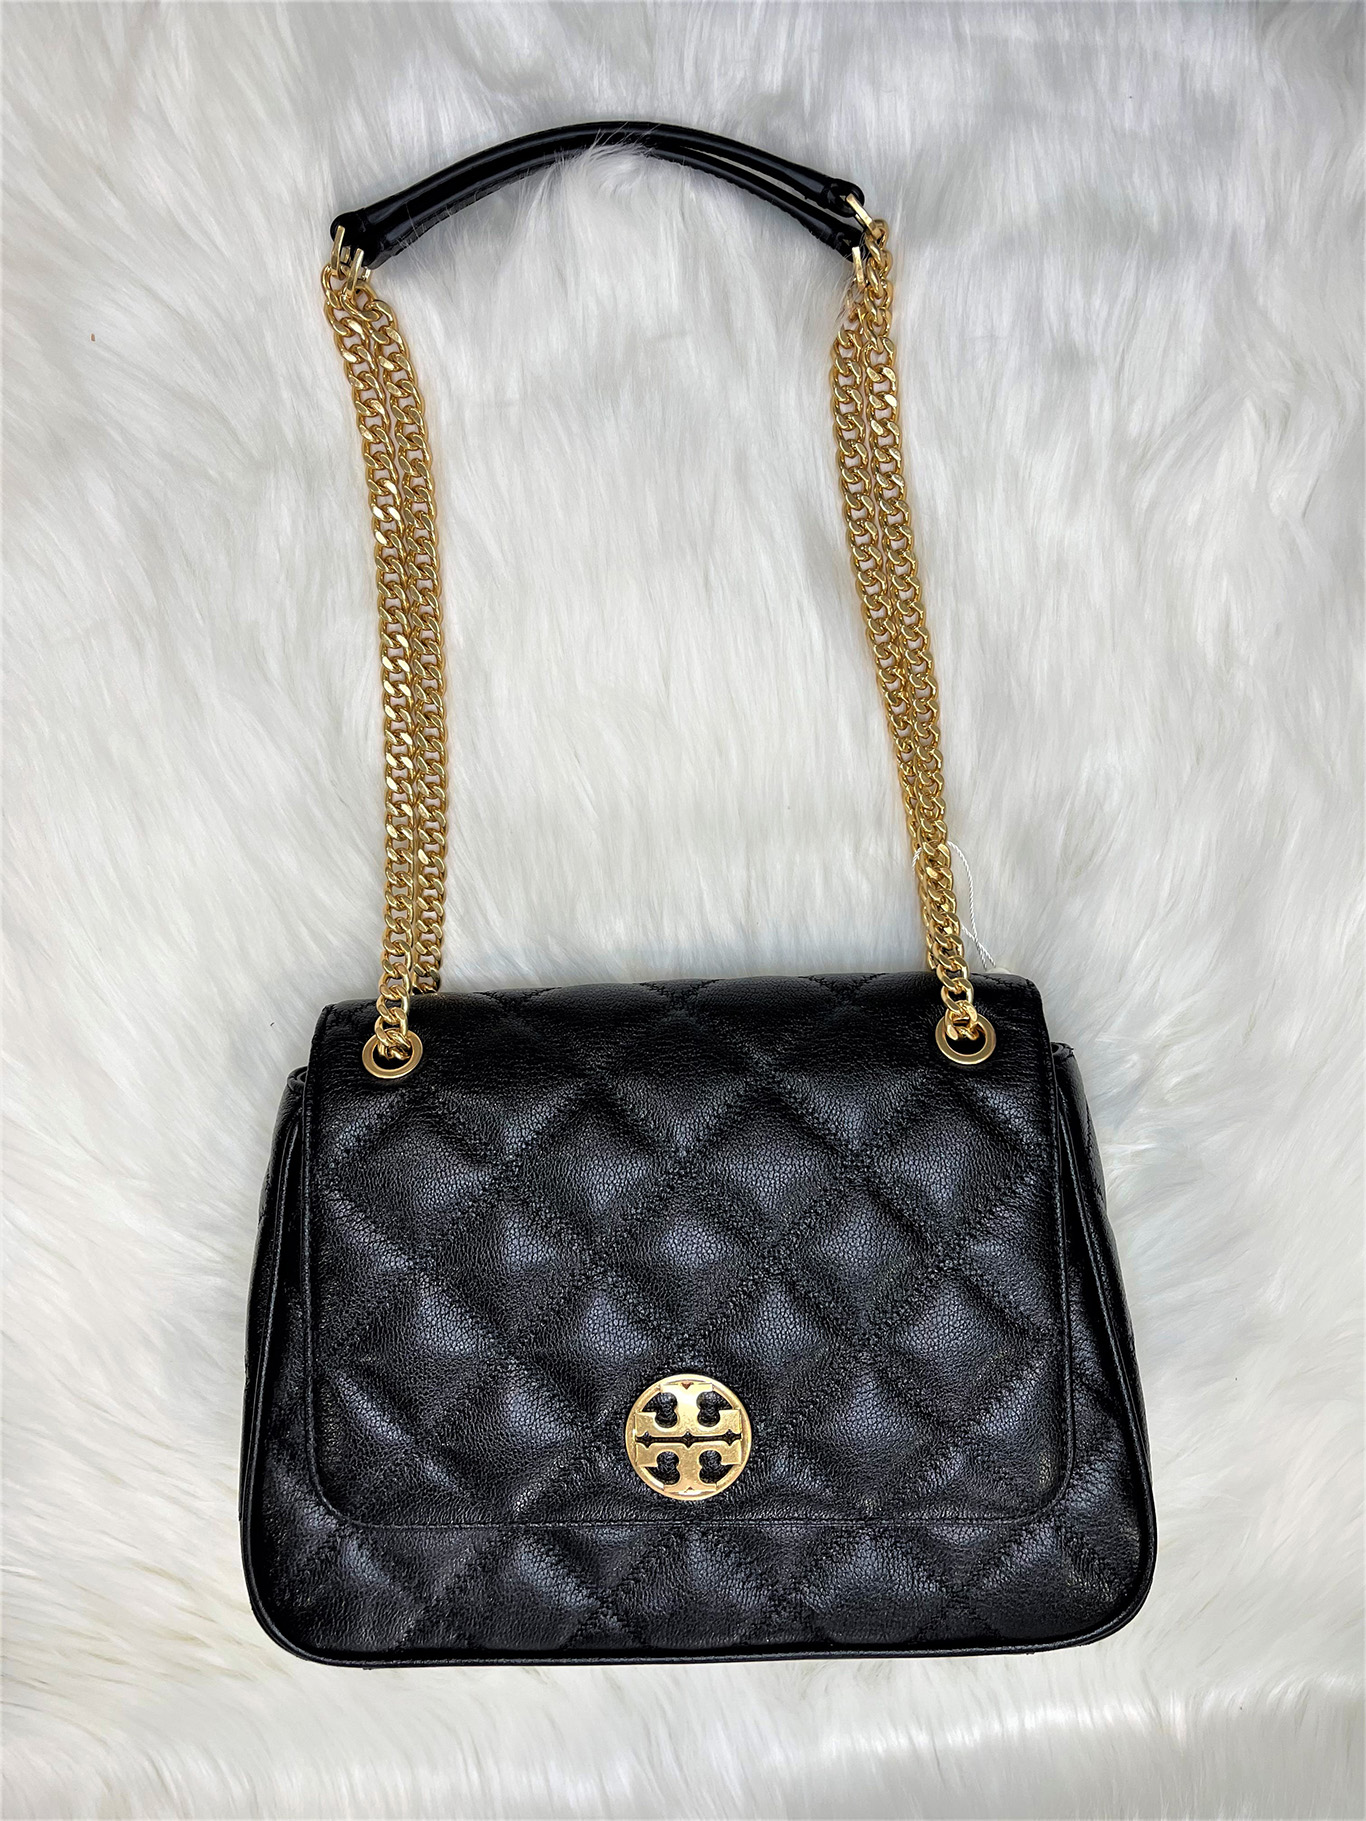 Fashion Look Featuring Tory Burch Shoulder Bags and Tory Burch